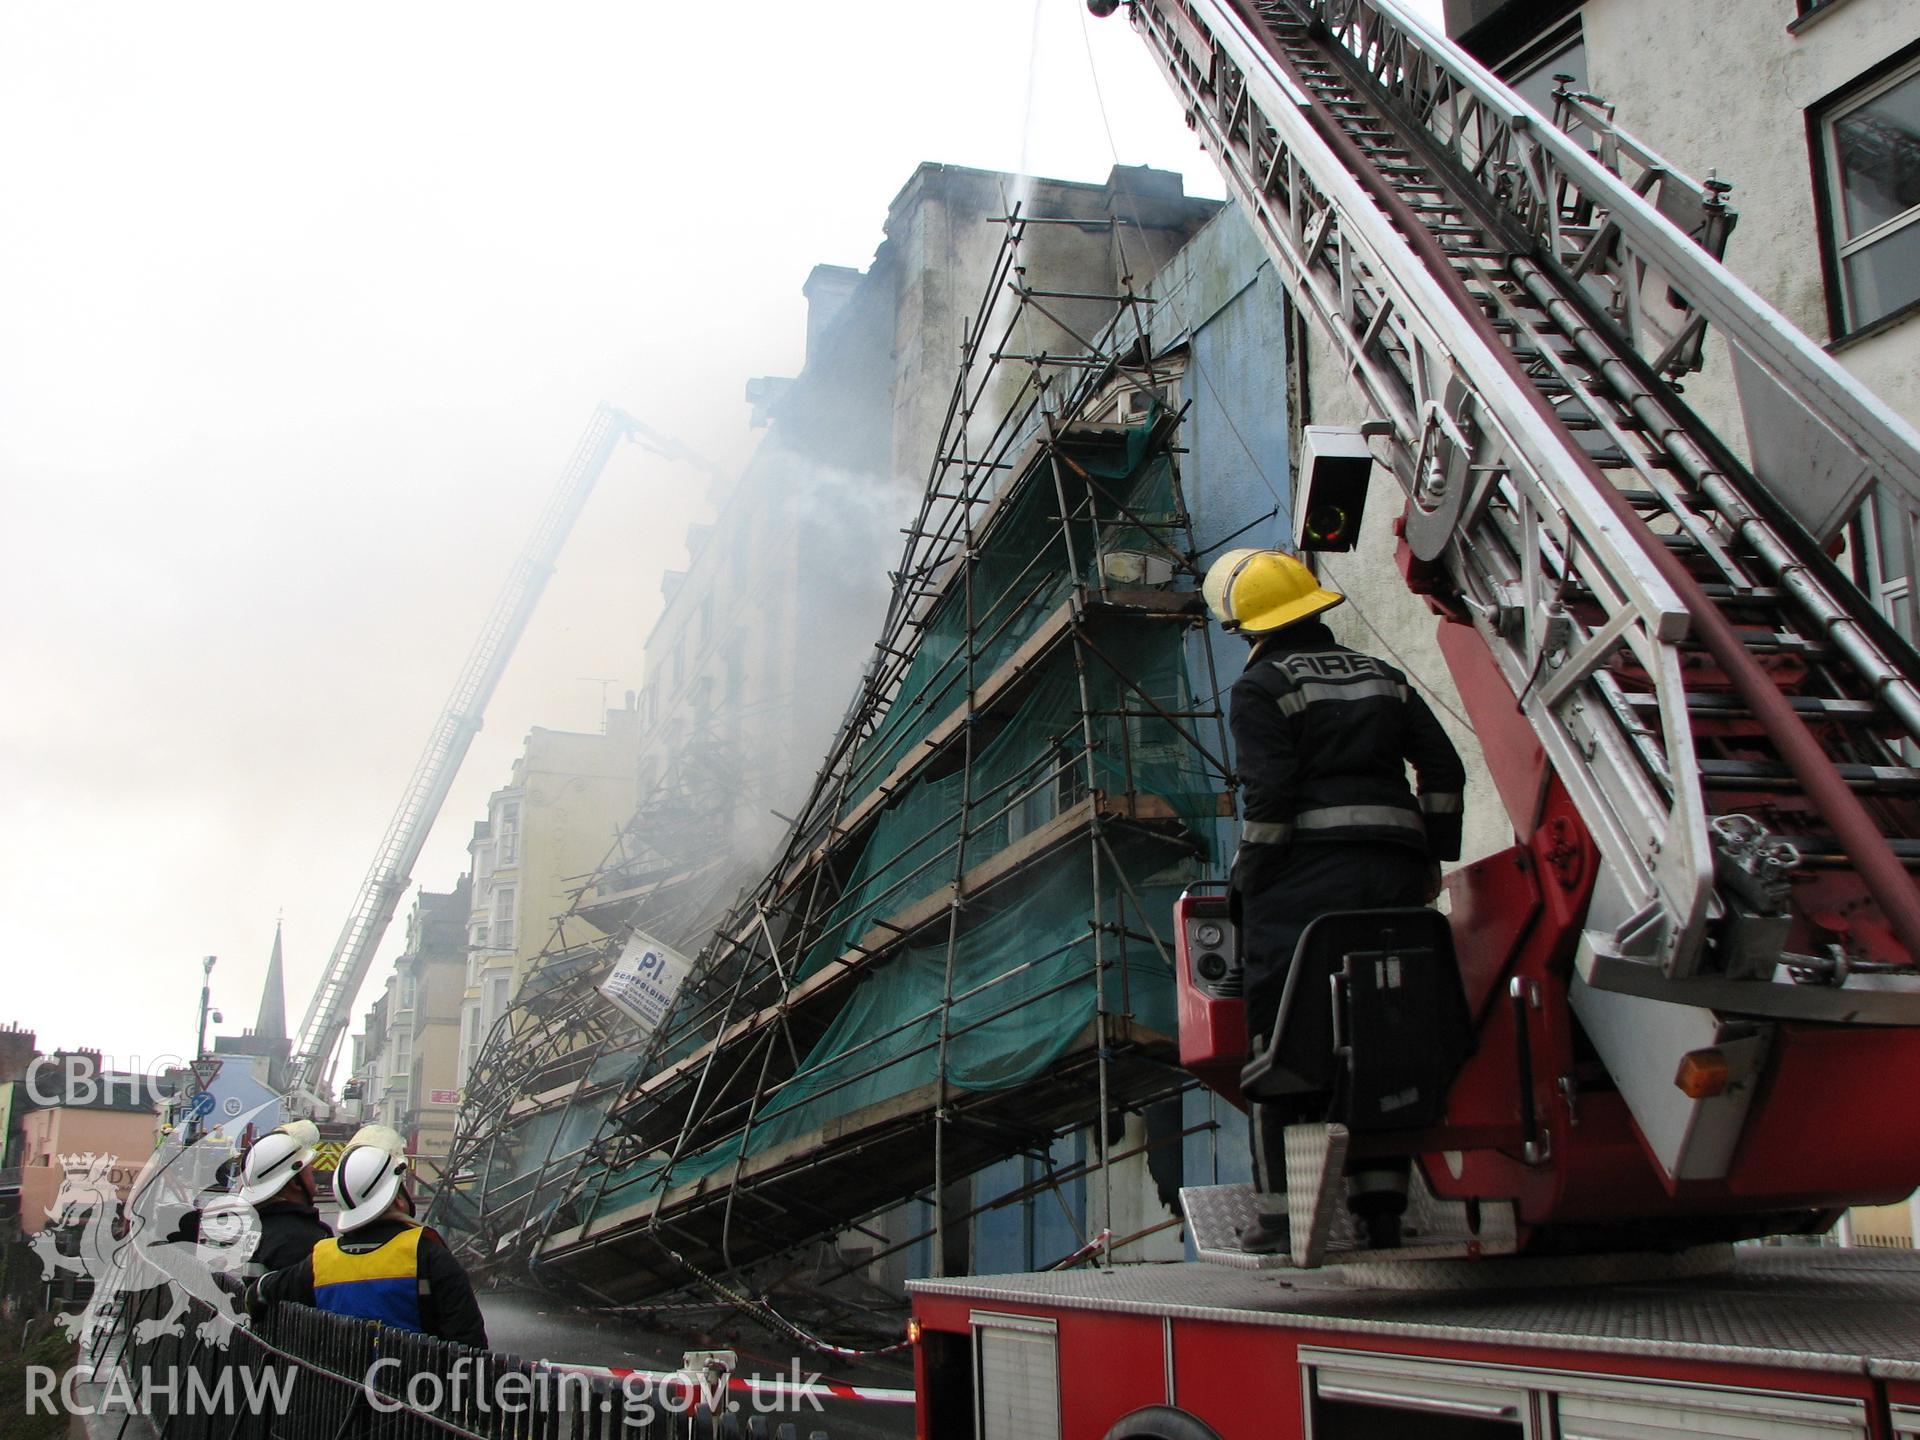 Colour digital photograph showing the fire at the Royal Gatehouse Hotel being extinguished.